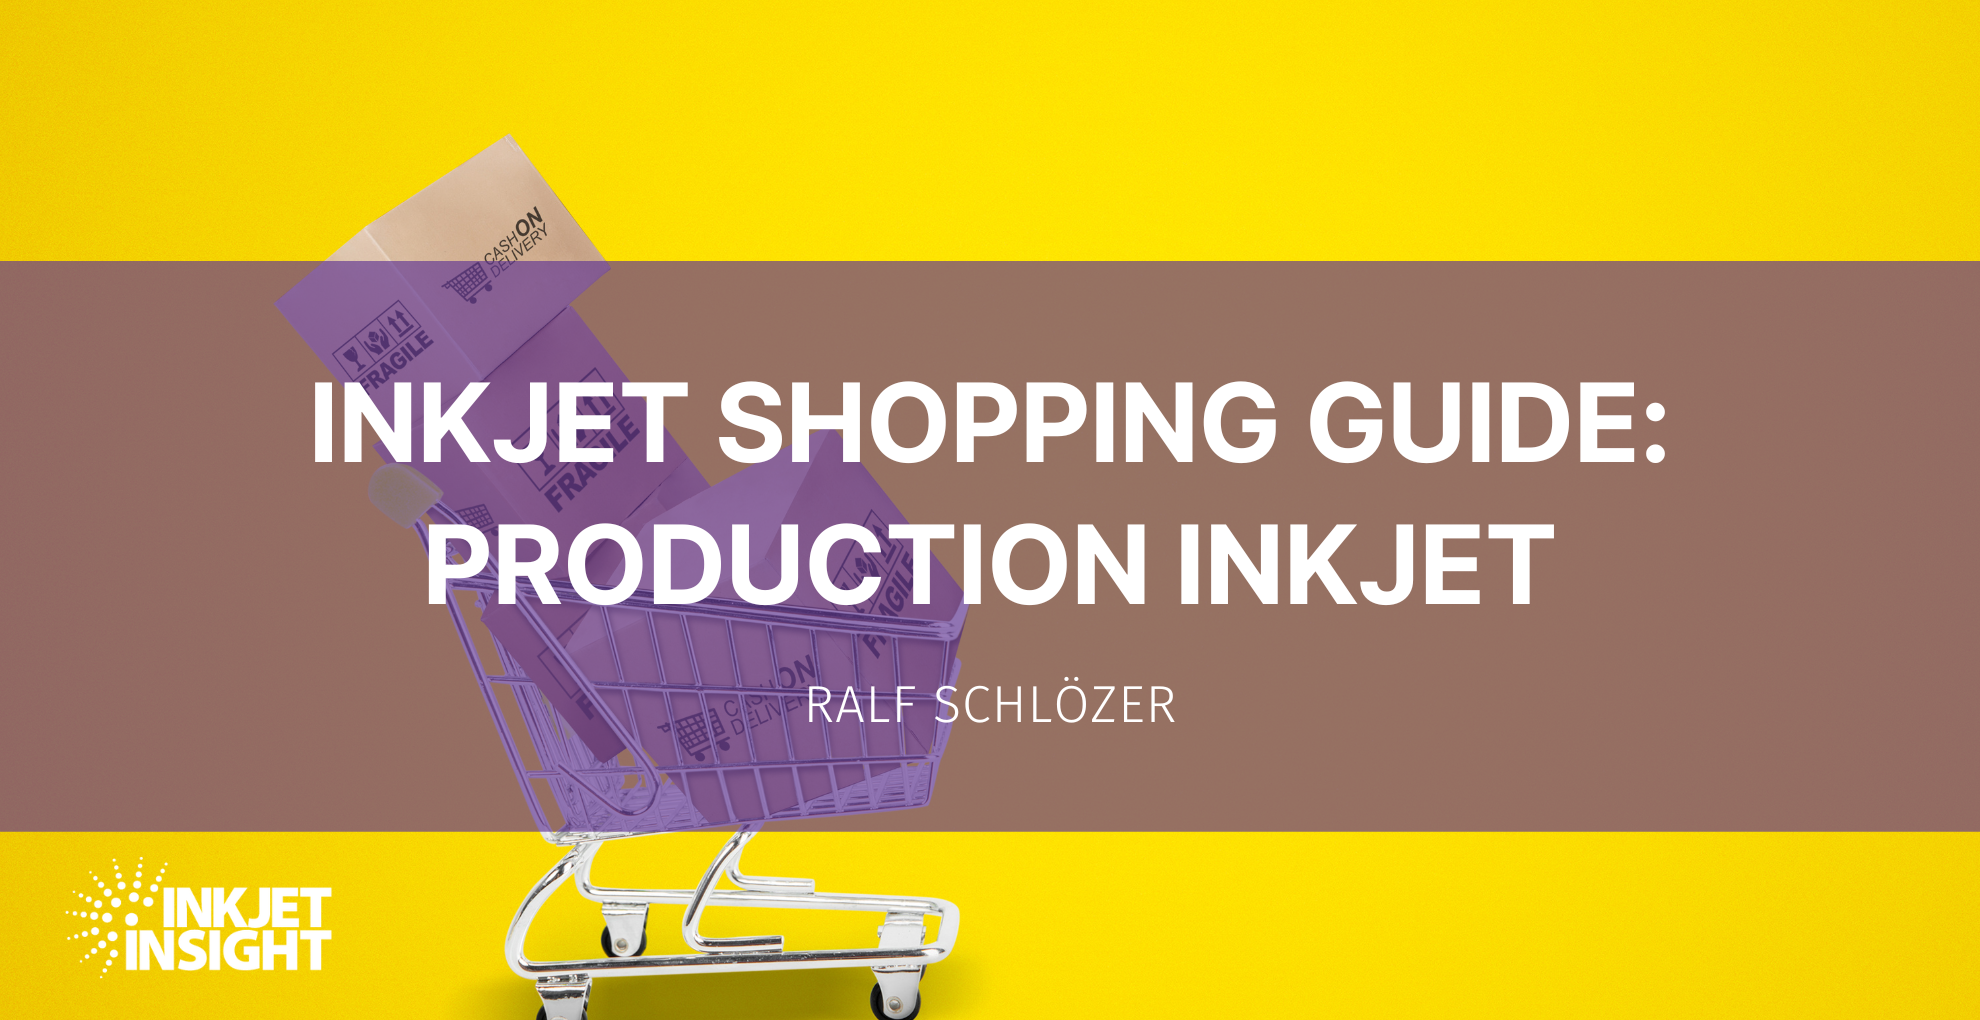 Featured image for “Production Inkjet Shopping Guide 1 – Entry Level”